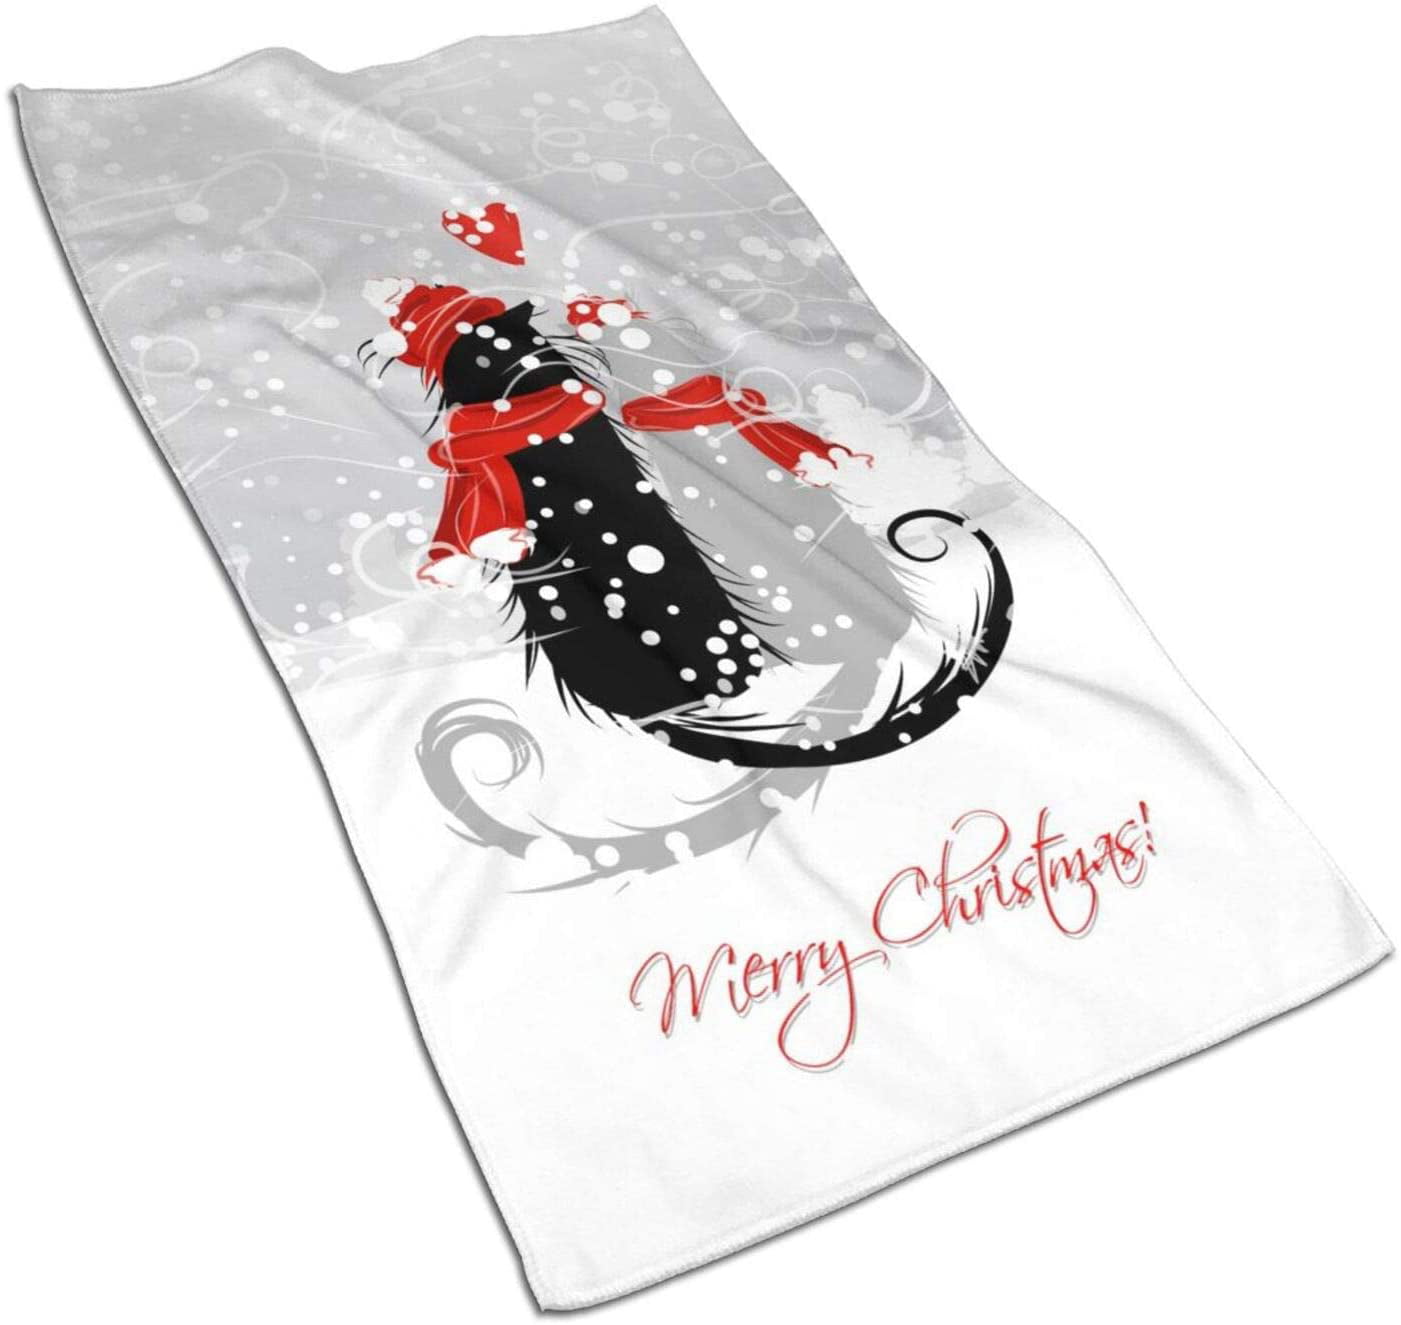 Abucaky Christmas Black Cat Hand Towel for Bathroom Super Soft Absorbent Fingertip Towel Multi-Purpose Towels for Bath Gym and Spa 27.5 X 15.7 Inch